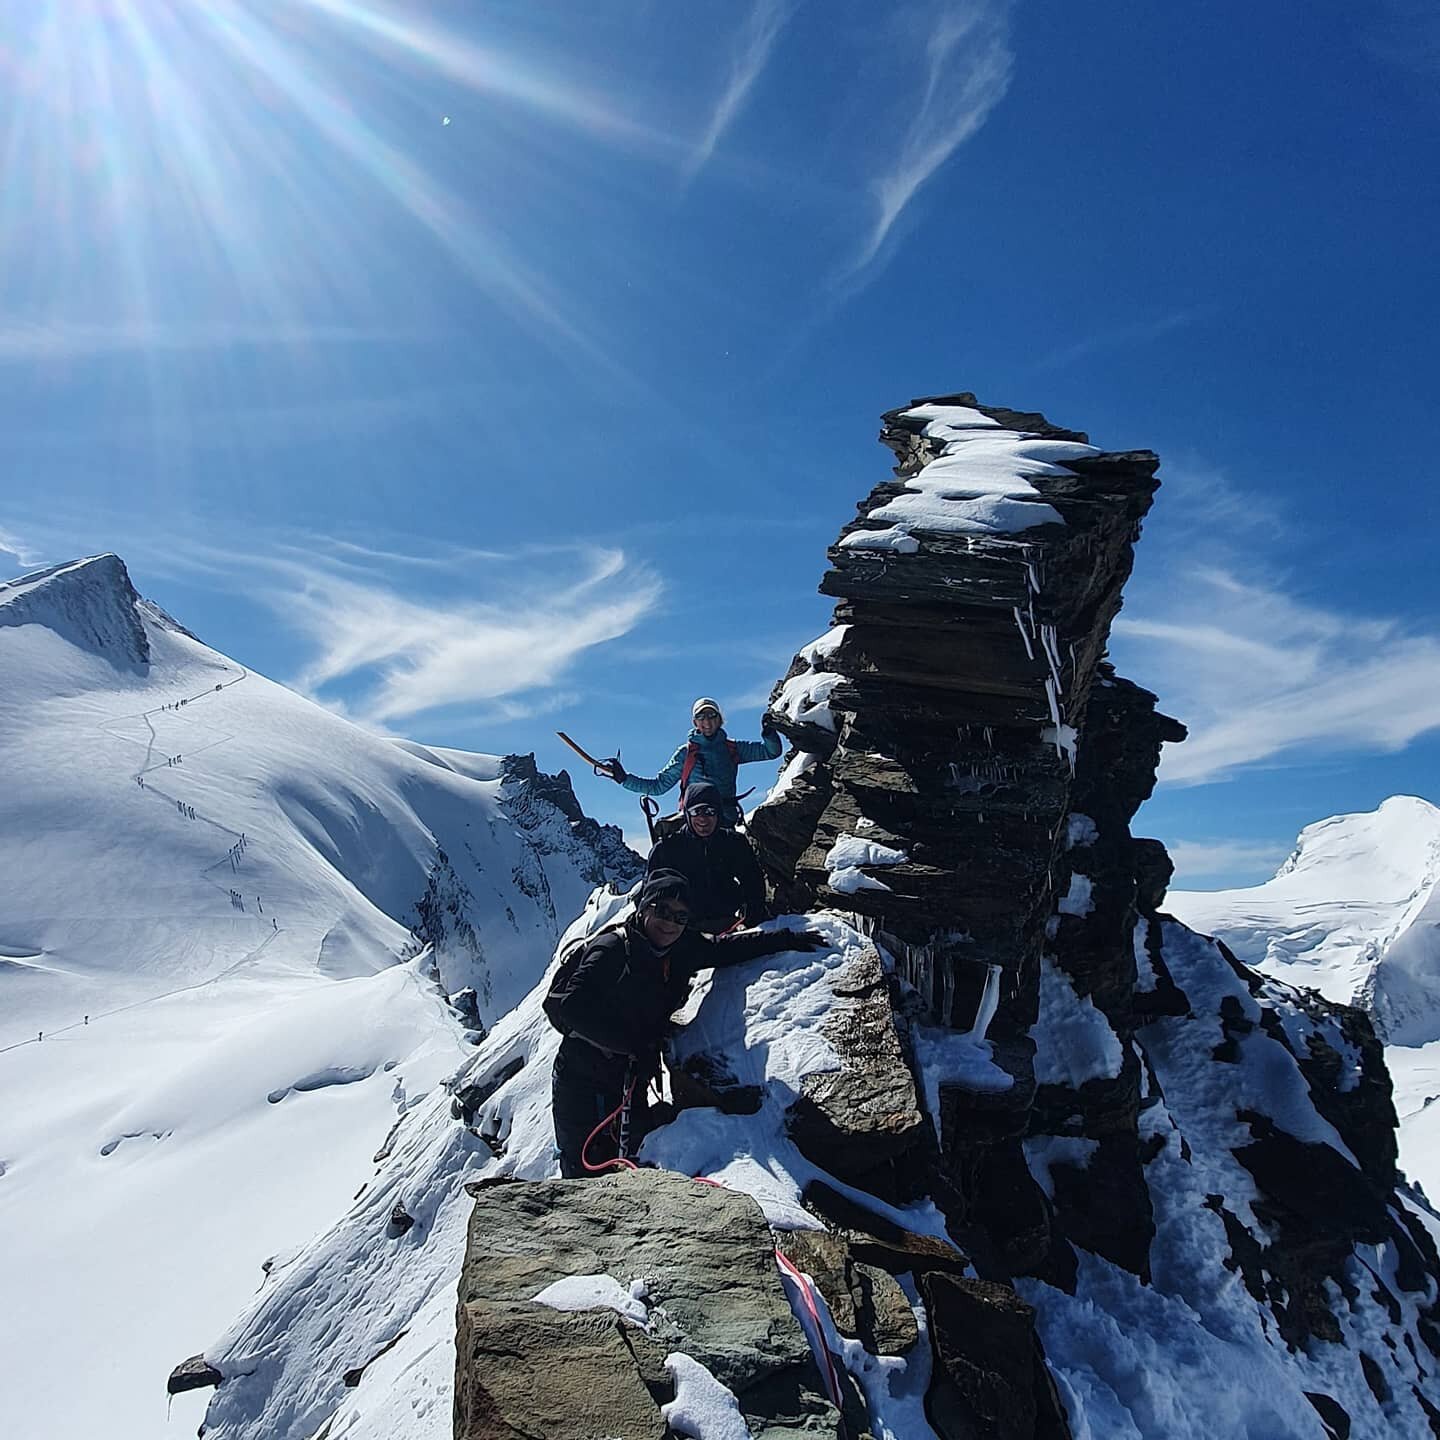 Lots of fresh snow yesterday gave way to a snowy ascent of Alphubel (4206m) today with Thomas, Laura and Andy. Going up was very close to perfect underfoot, the summit cross was partially buried once we got there and then the descent was mostly deep 